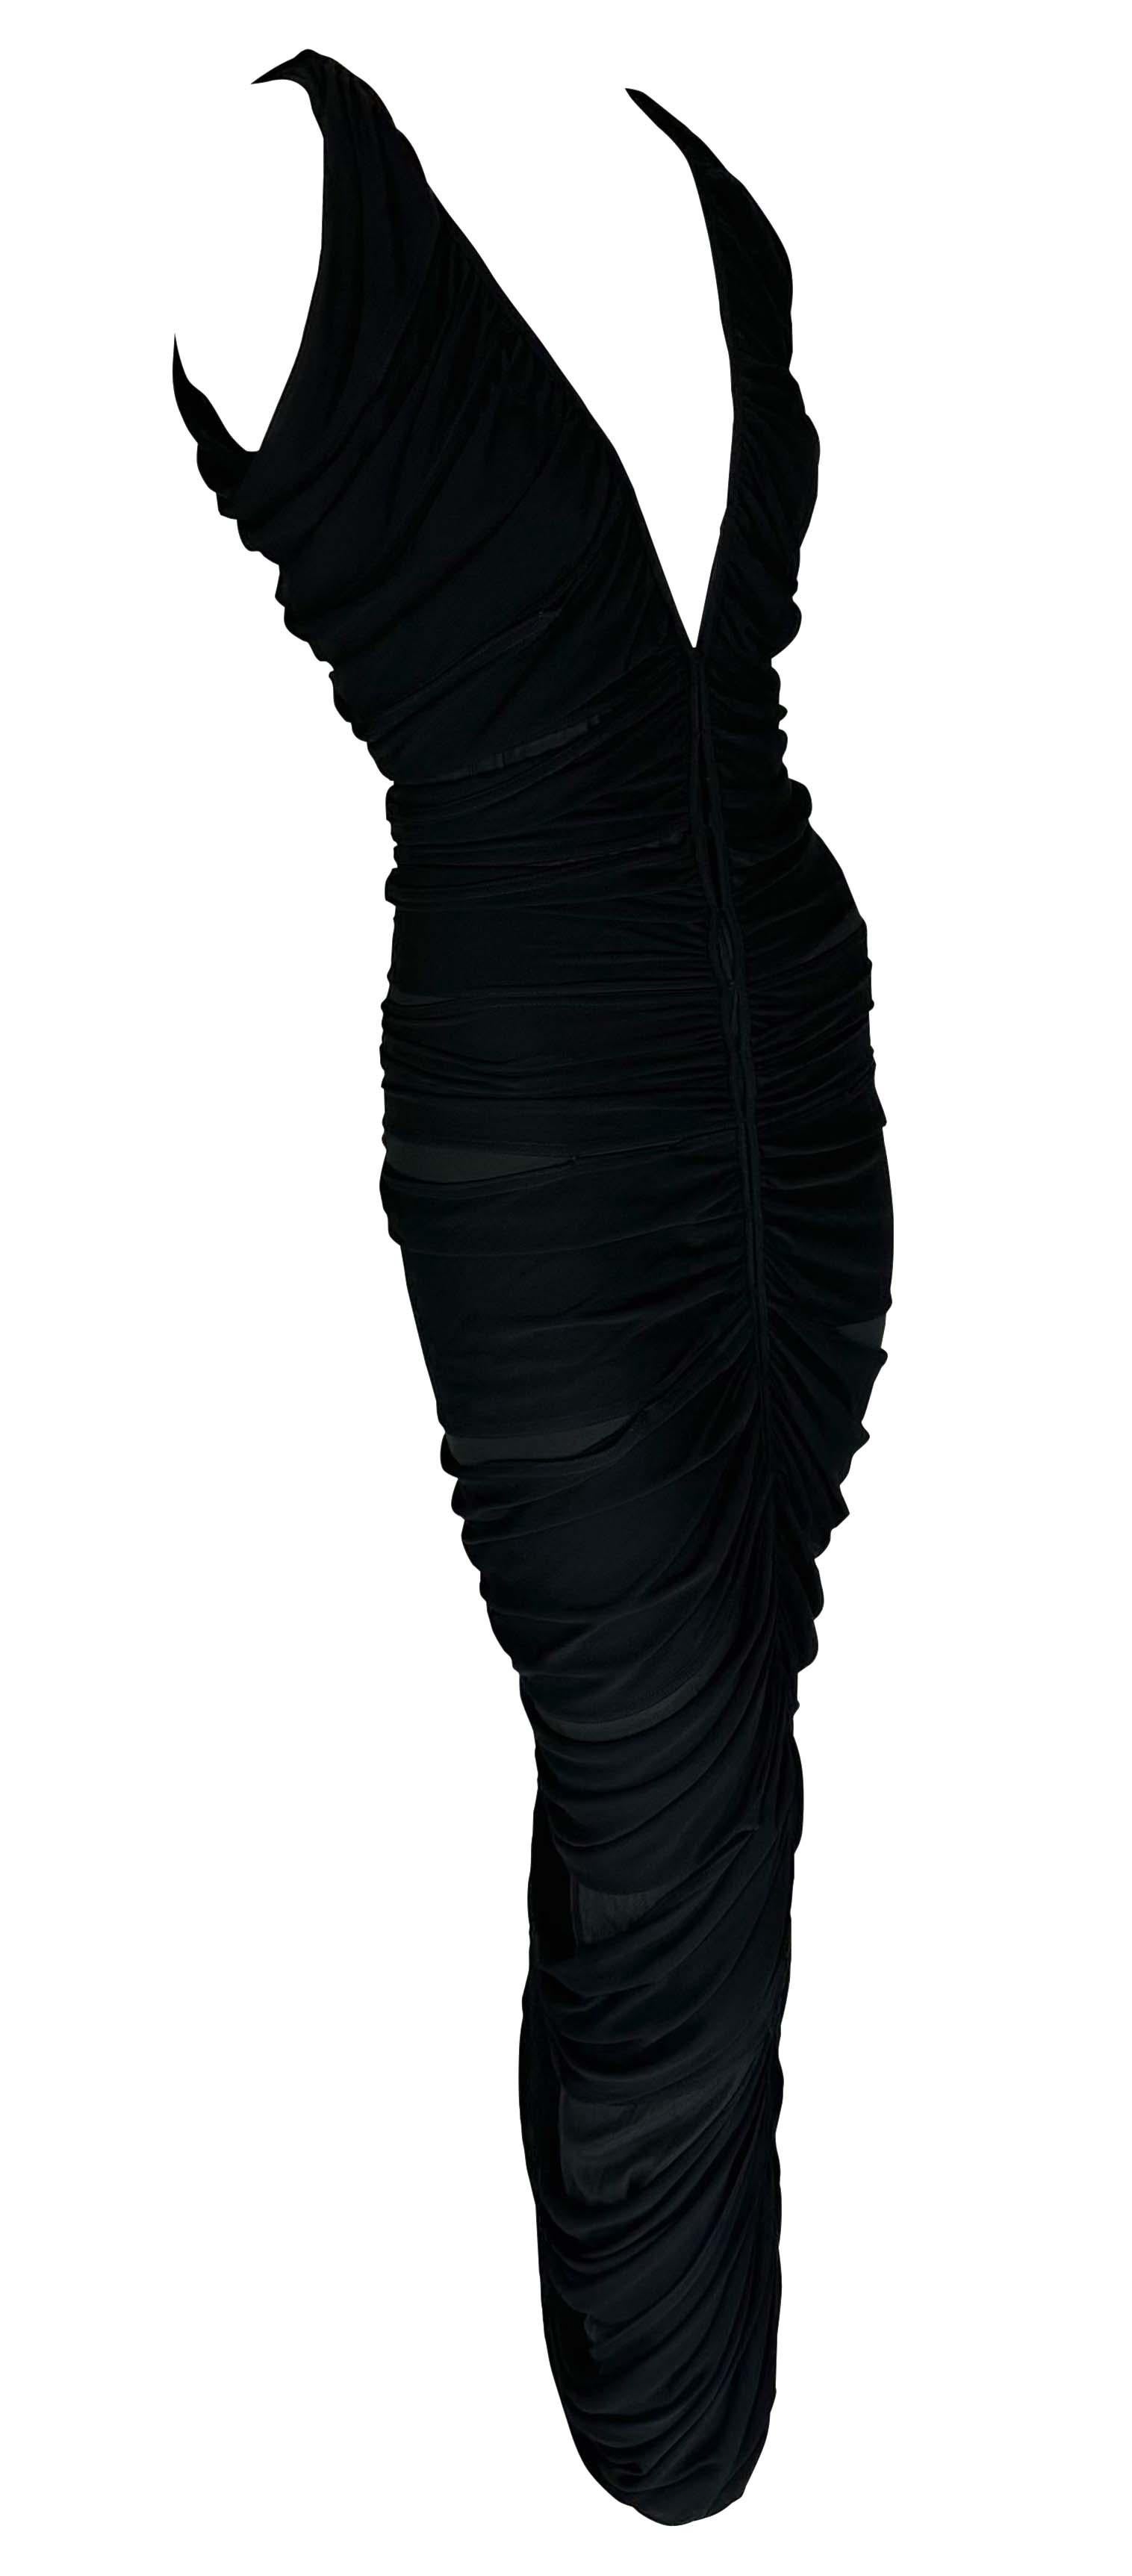 S/S 2001 Yves Saint Laurent by Tom Ford Draped Bodycon Black Viscose Dress For Sale 4